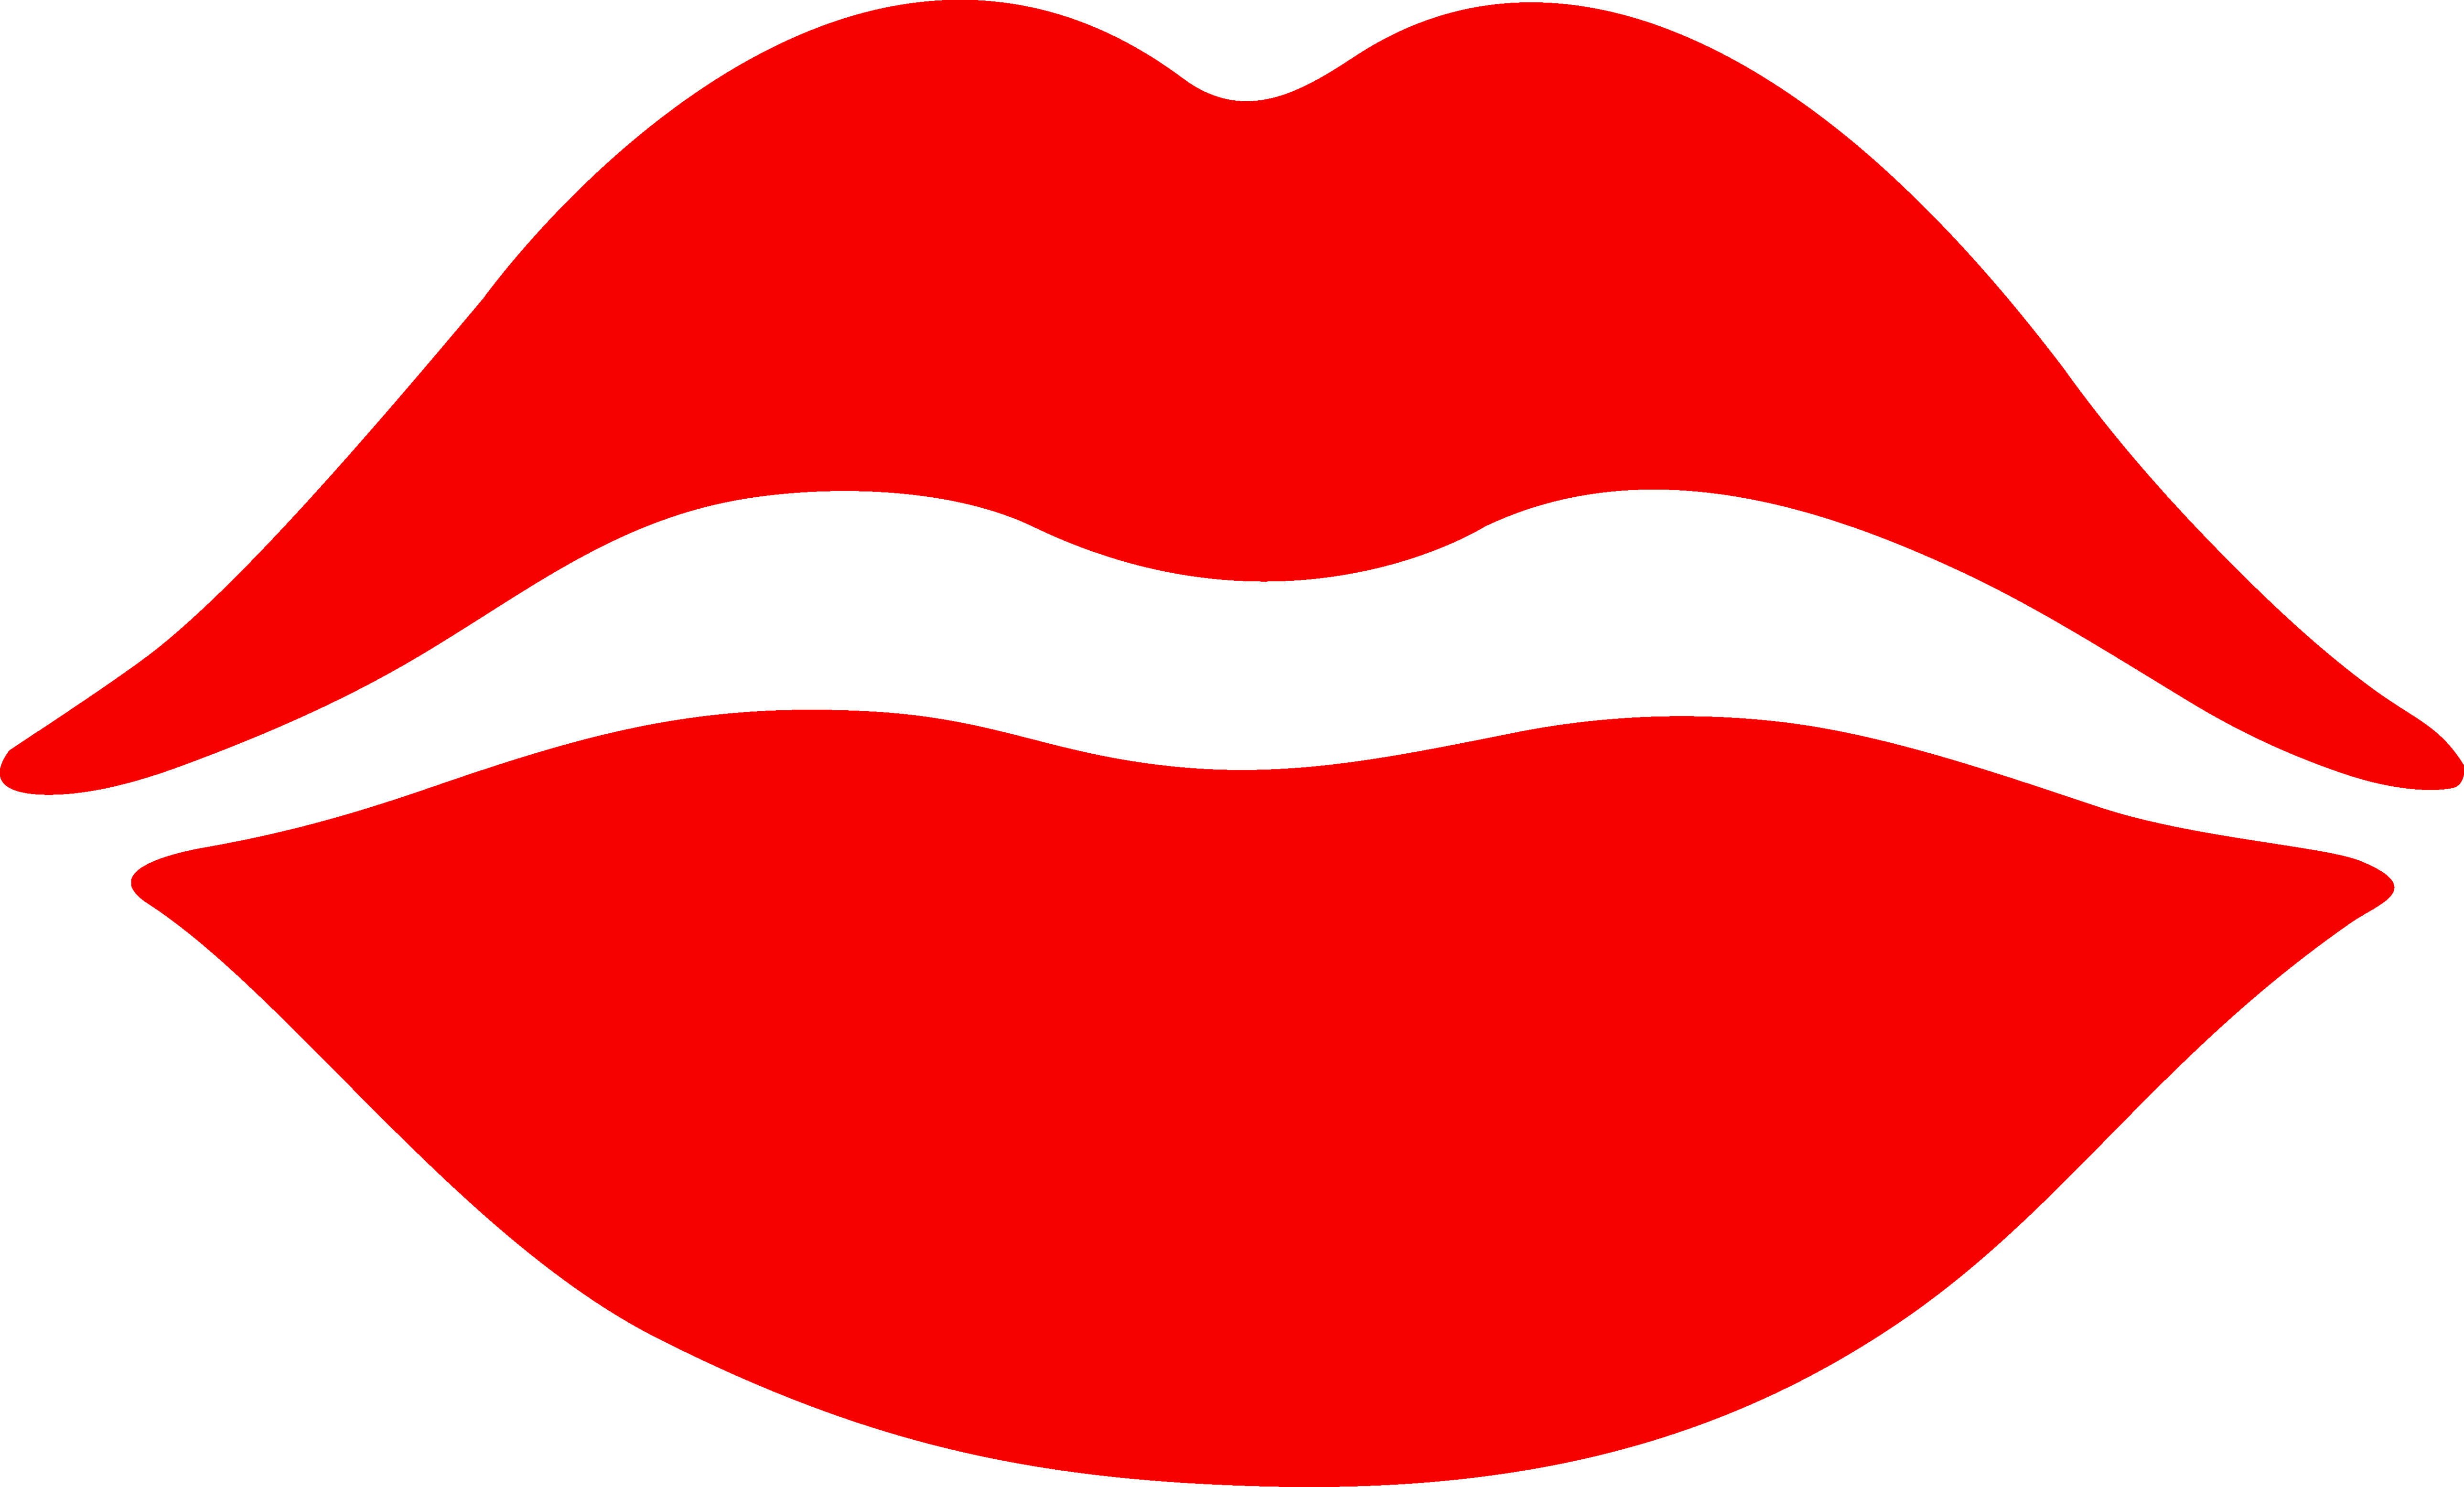 Lips pictures clip art